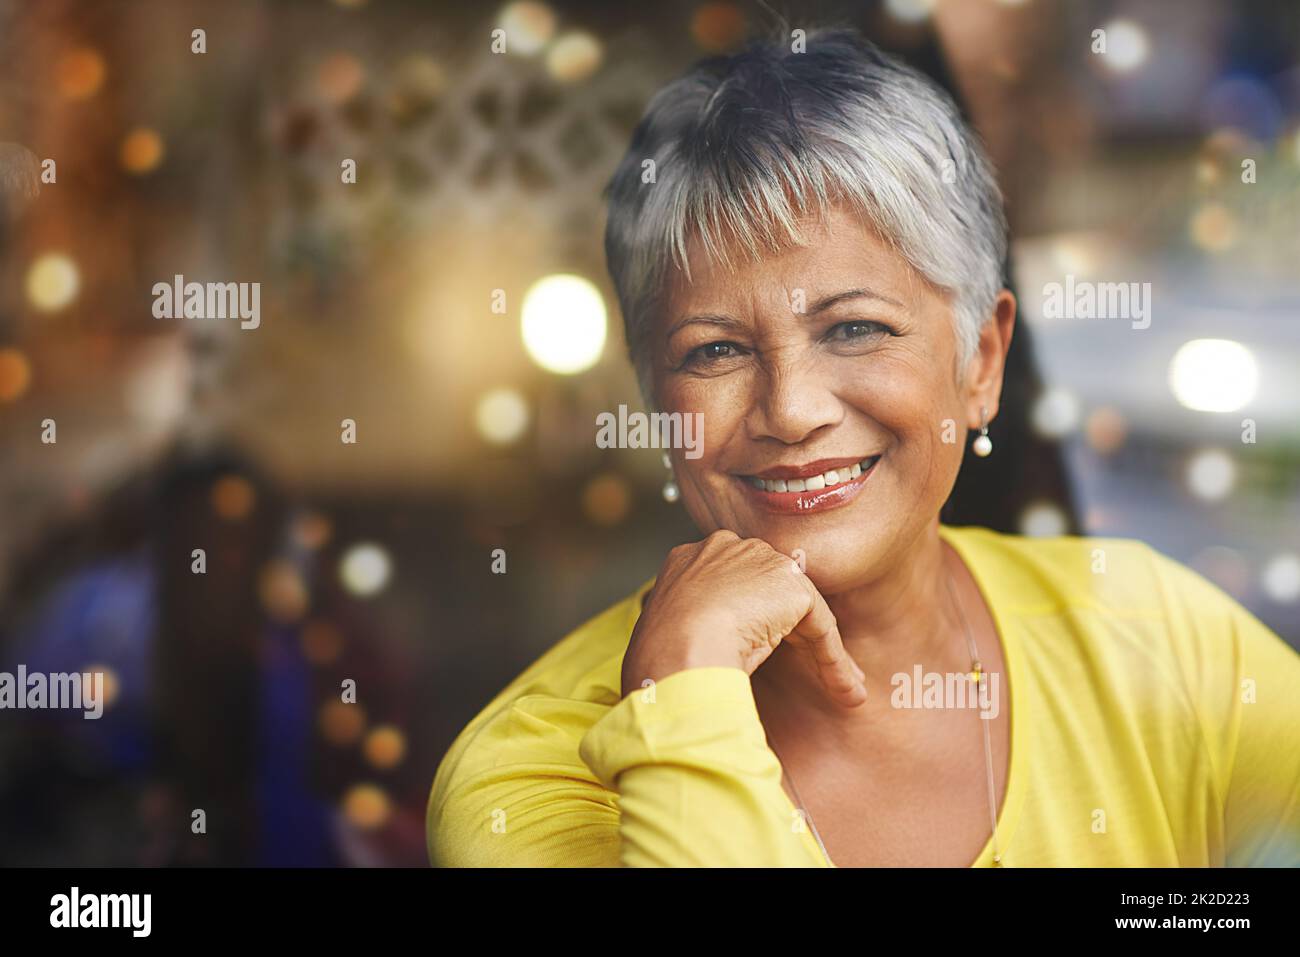 Make today a happy one. a mature woman enjoying some free time. Stock Photo